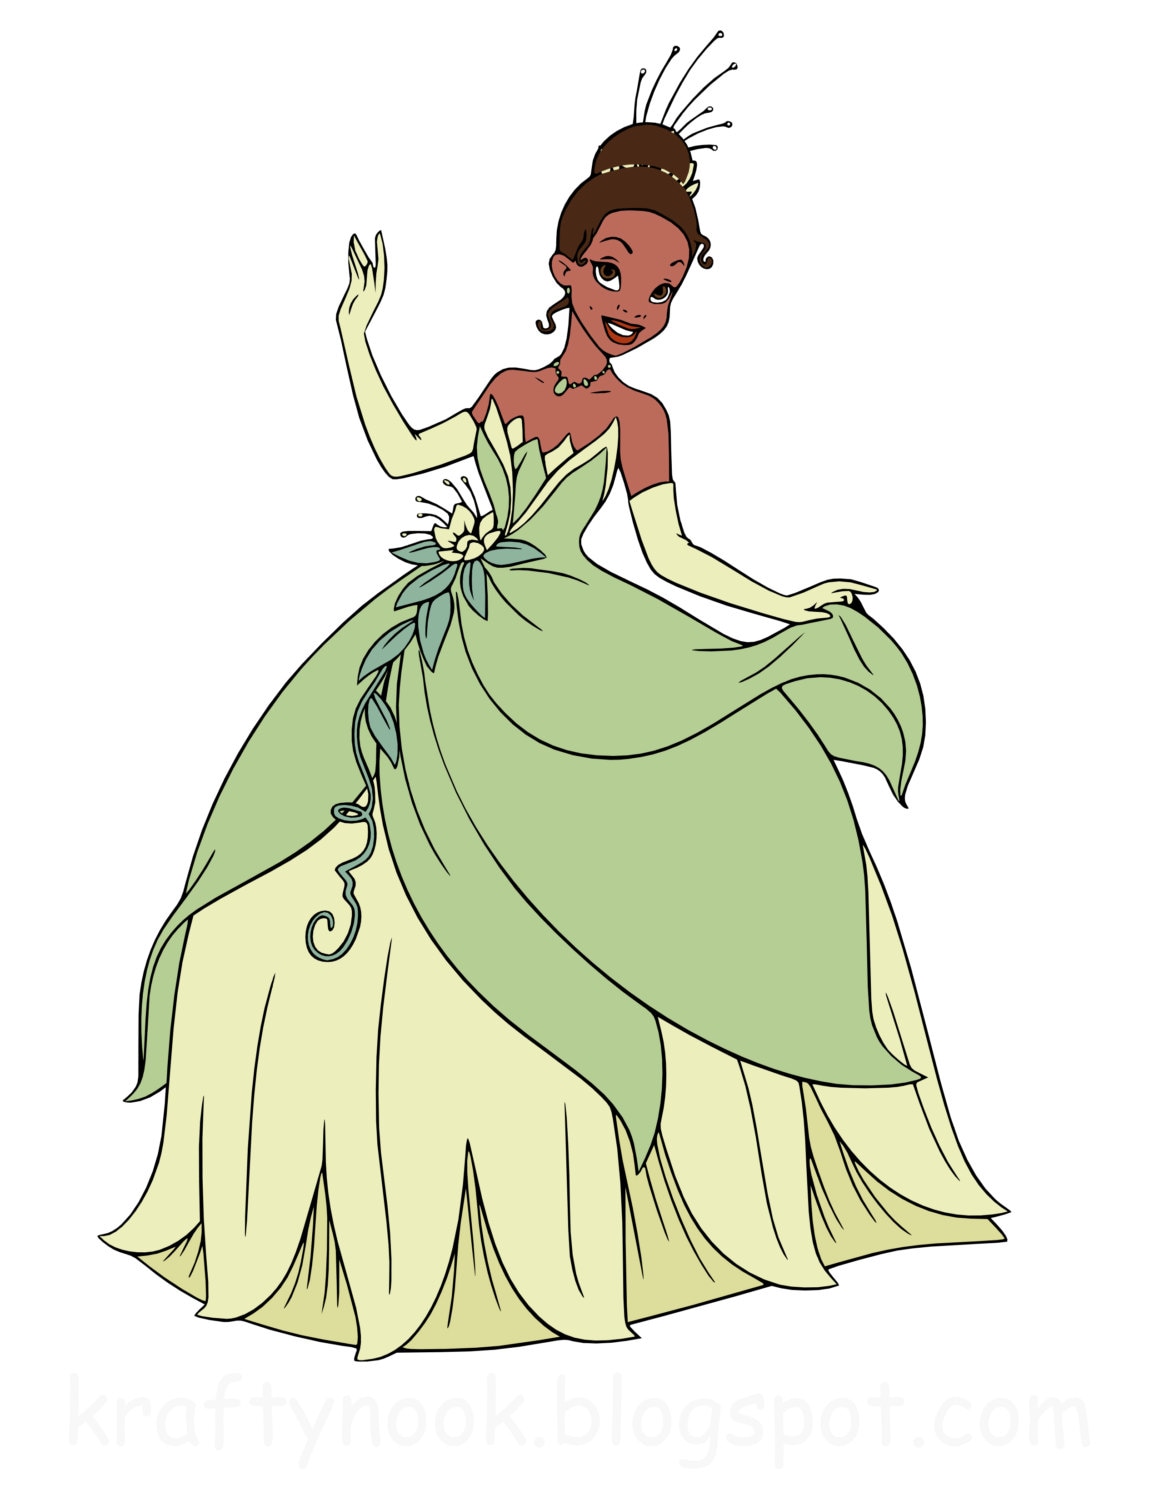 Download Princess and Frog Tiana standing SVG Instant by SweetRaegans